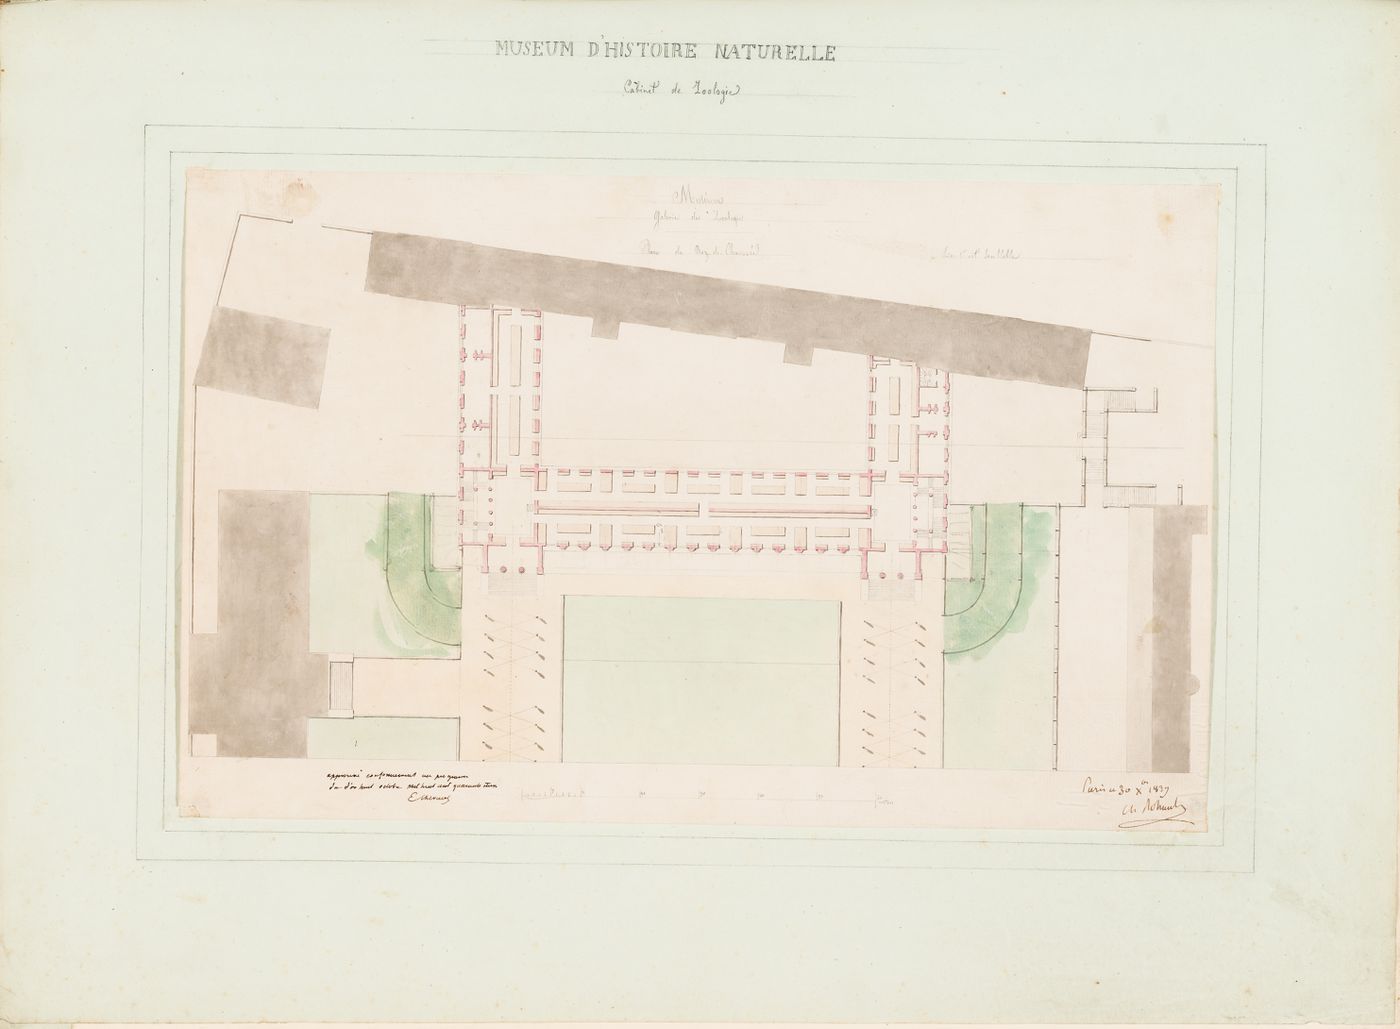 Project for a Galerie de zoologie, 1839: Ground floor plan